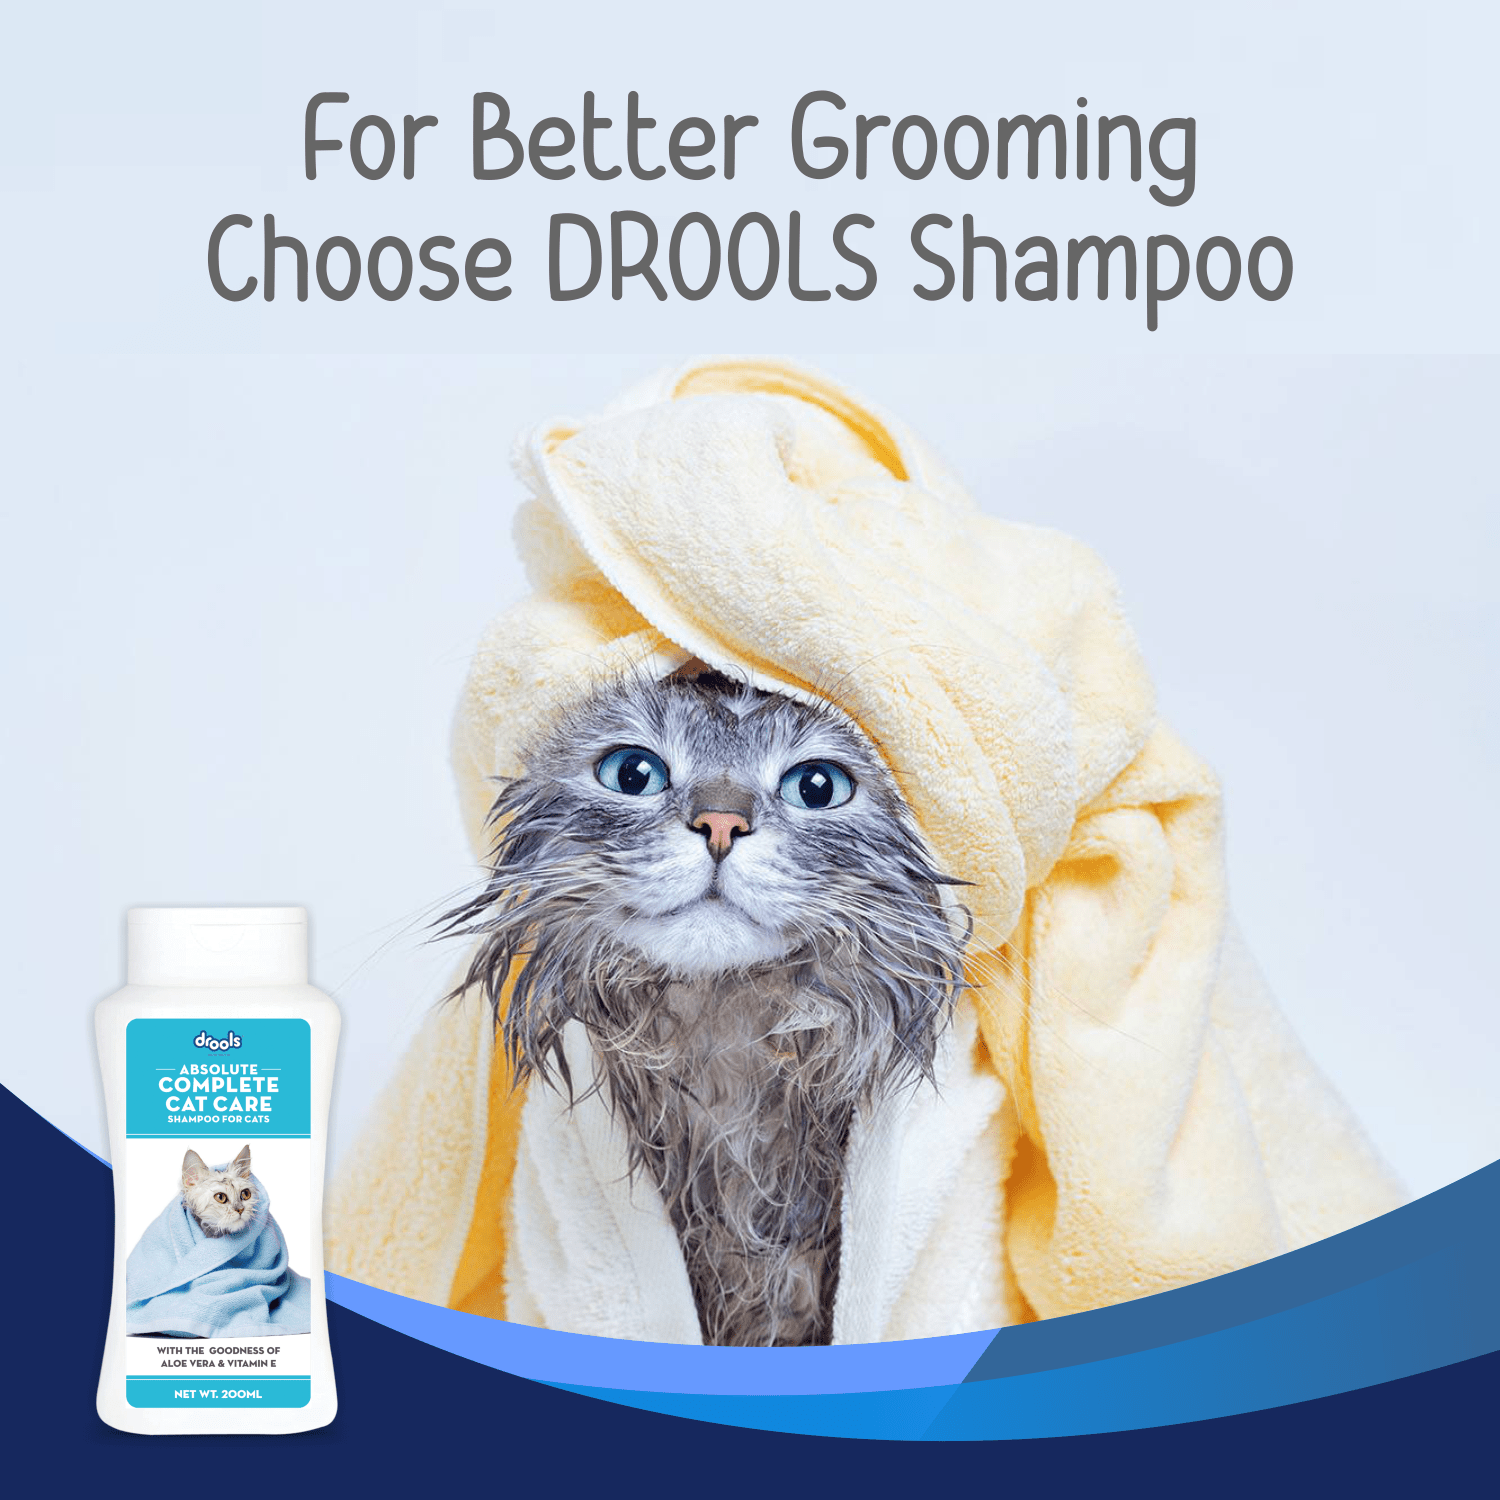 Drools Complete Care Shampoo for Cats